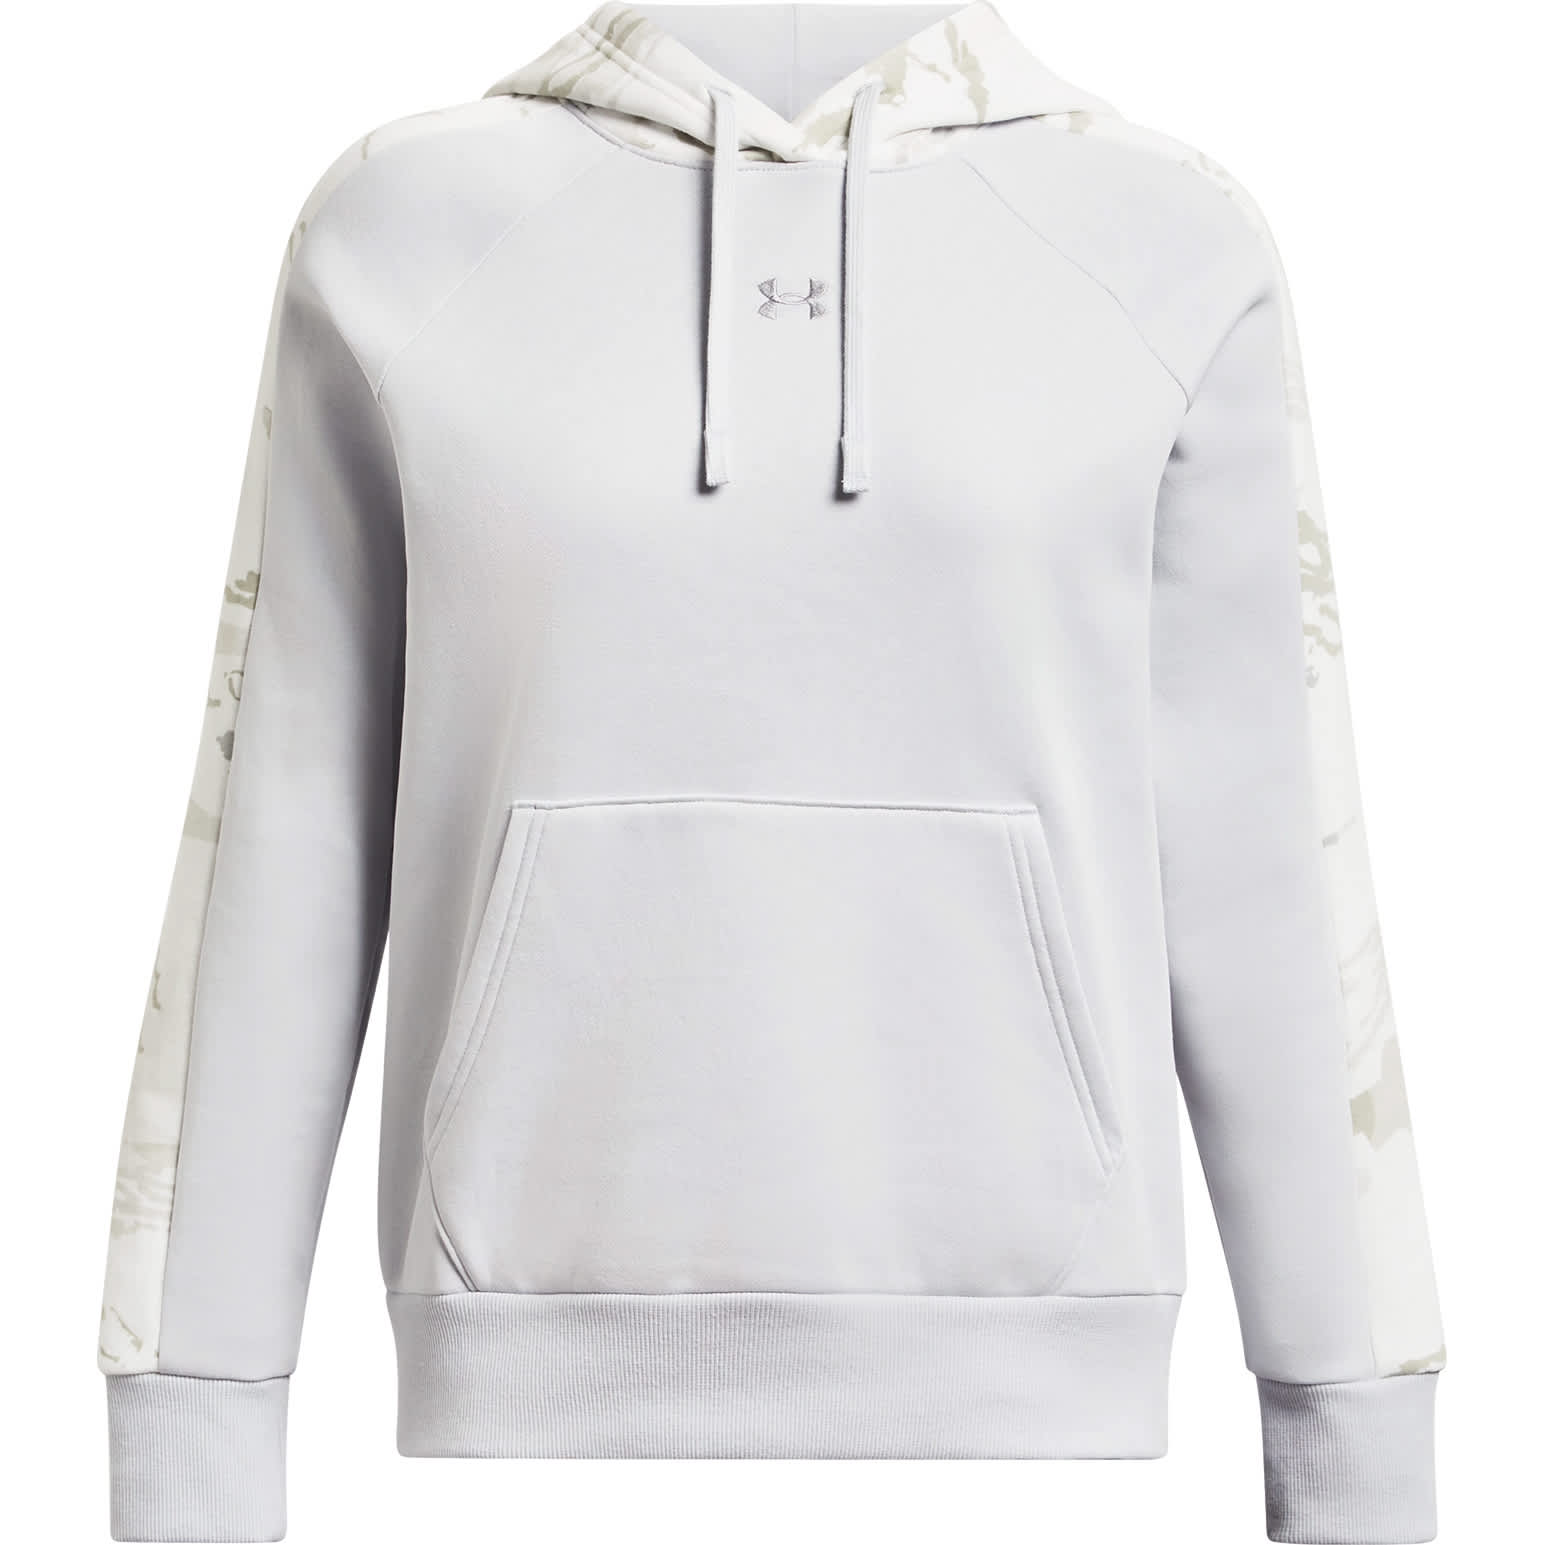 Under Armour® Women’s Rival Long-Sleeve Hoodie